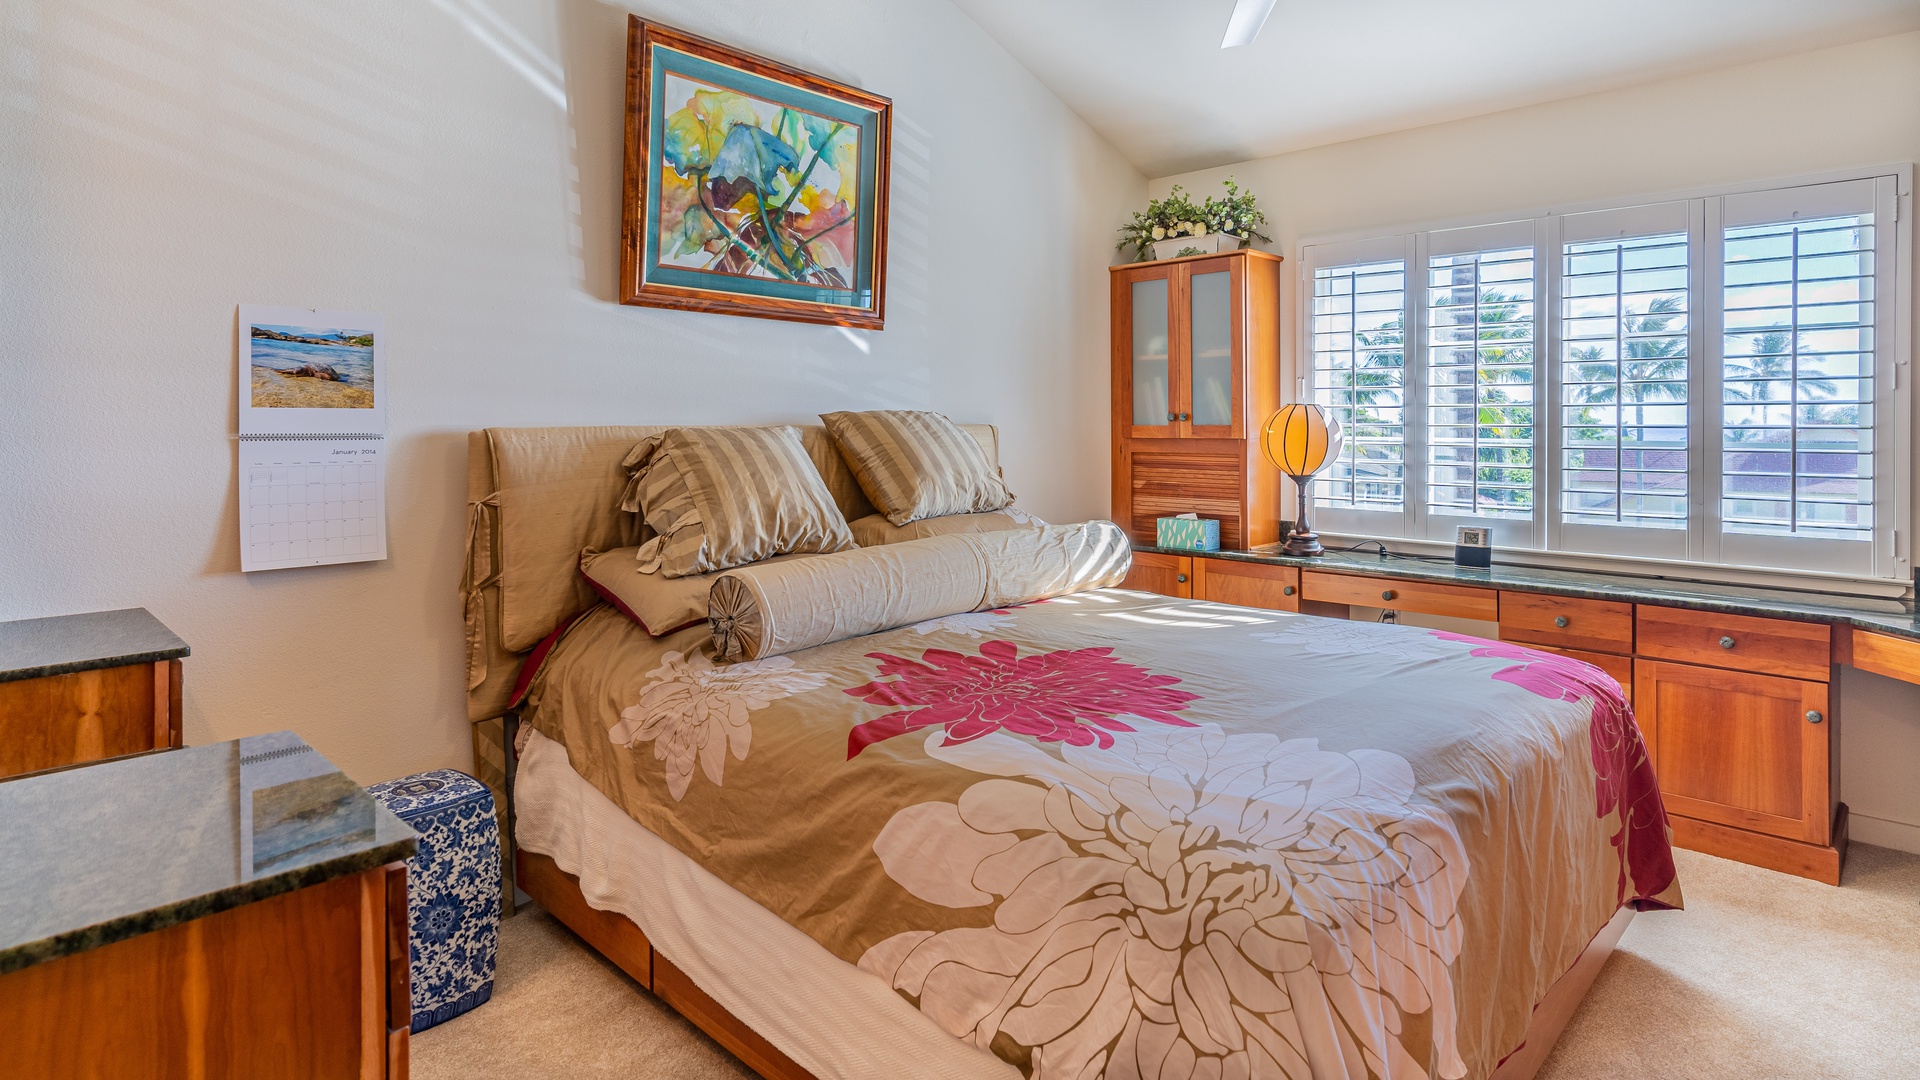 Kapolei Vacation Rentals, Kai Lani 16C - The primary guest bedroom is comfortable and spacious for a restful slumber.